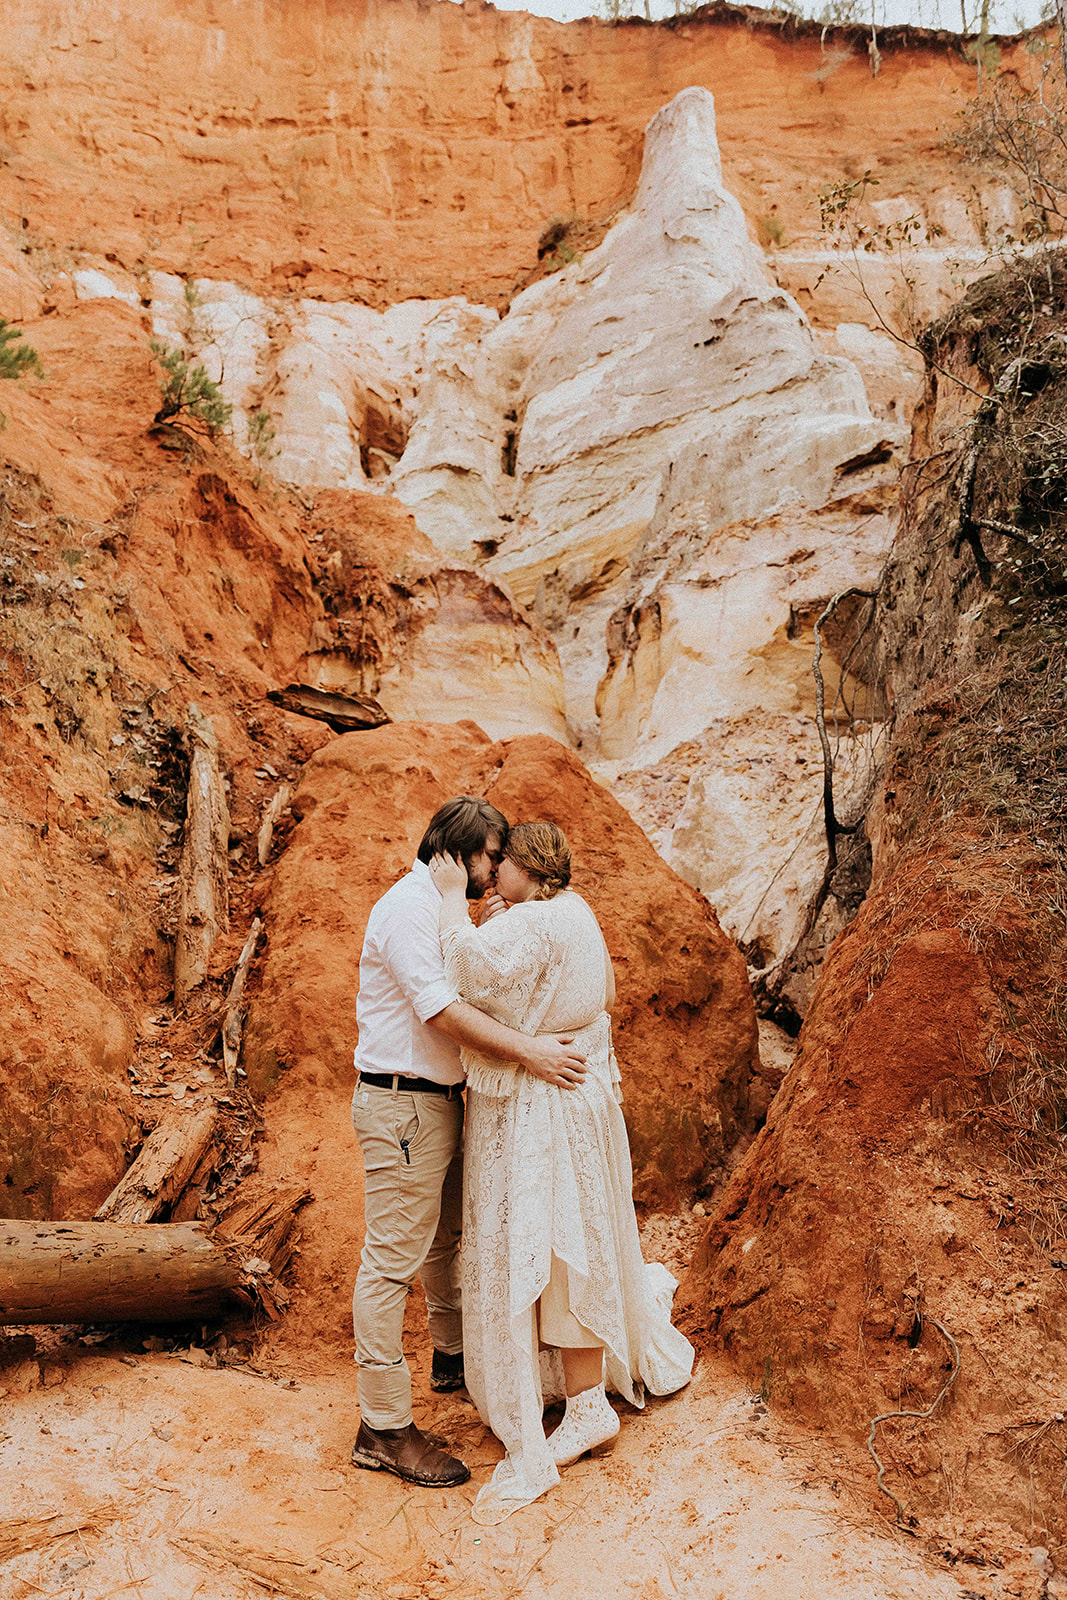 A couple stands back-to-back on a rocky landscape with reddish and white geological formations, surrounded by scattered fallen logs. The woman wears a long cream-colored dress and the man is in casual attire at a georgia elopement location